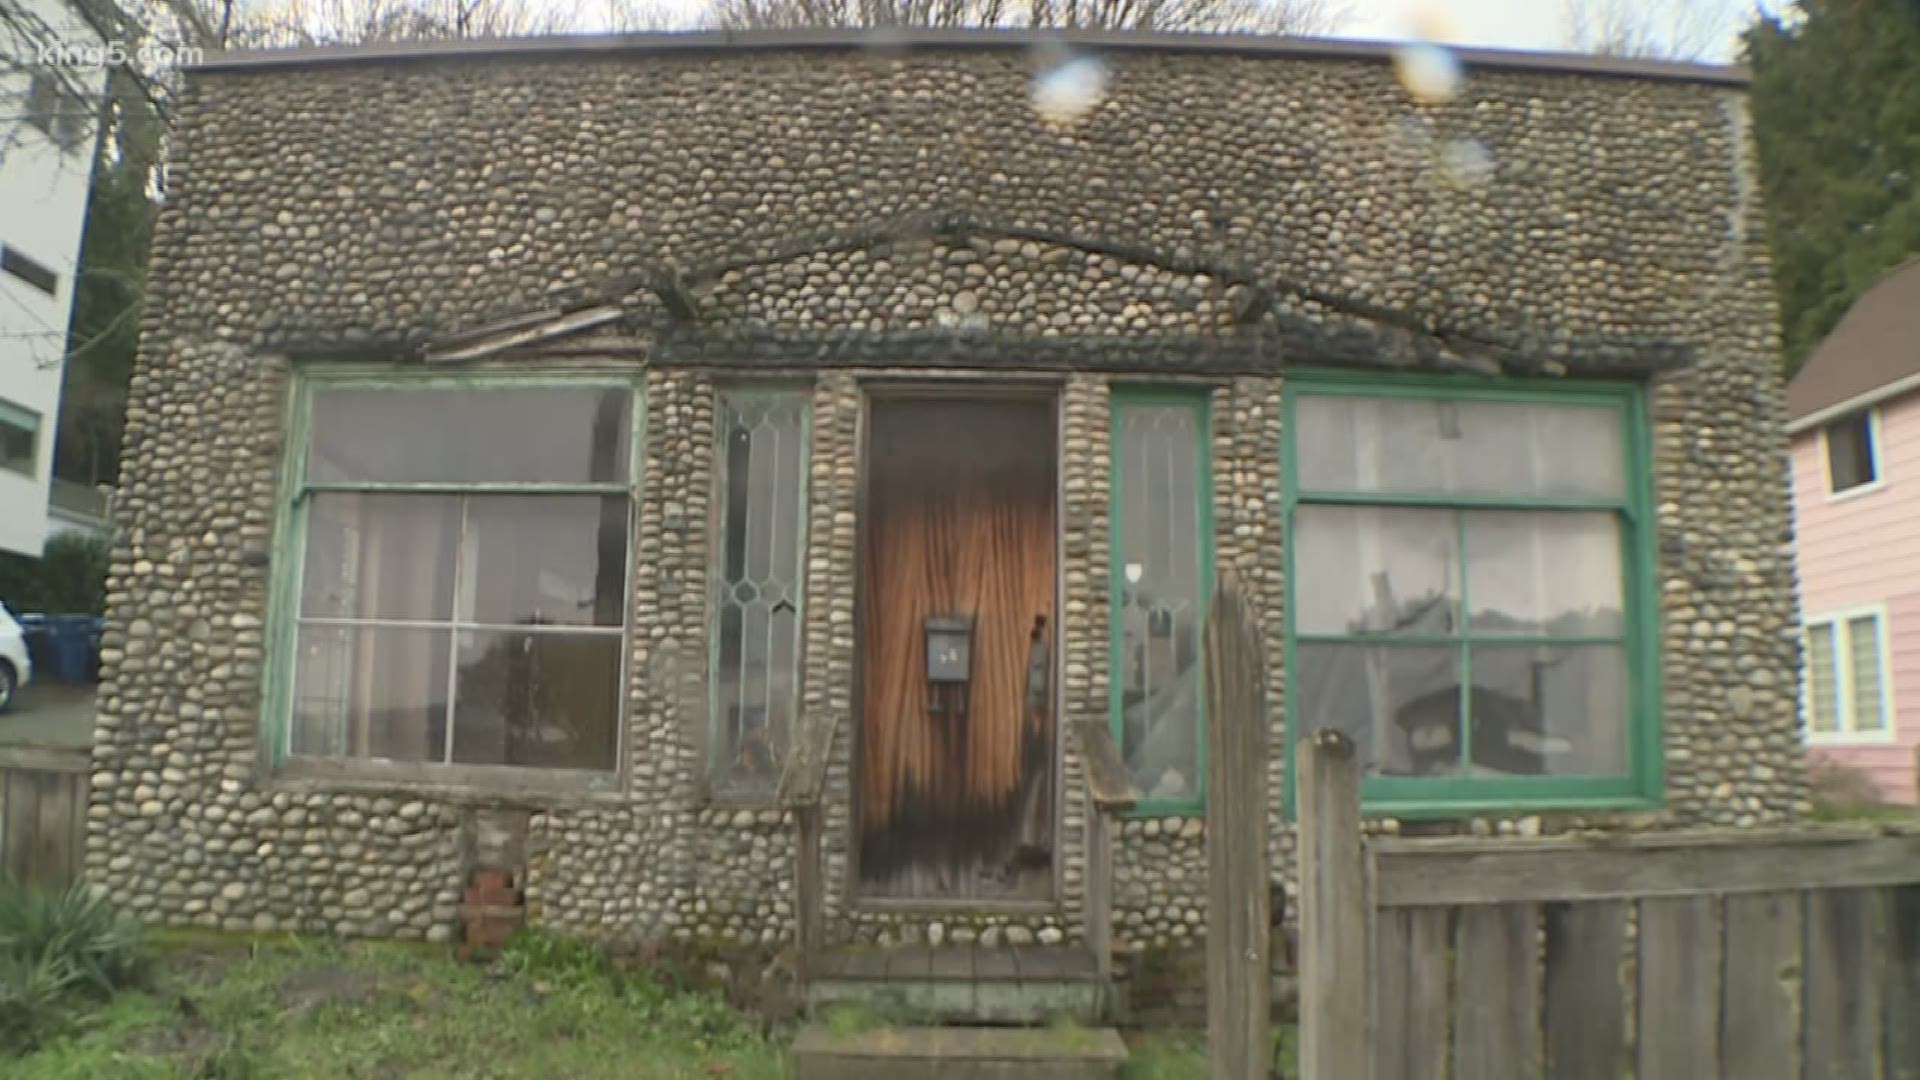 A project is underway to save a piece of West Seattle history - the beloved Stone House. KING 5's Vanessa Misciagna reports.